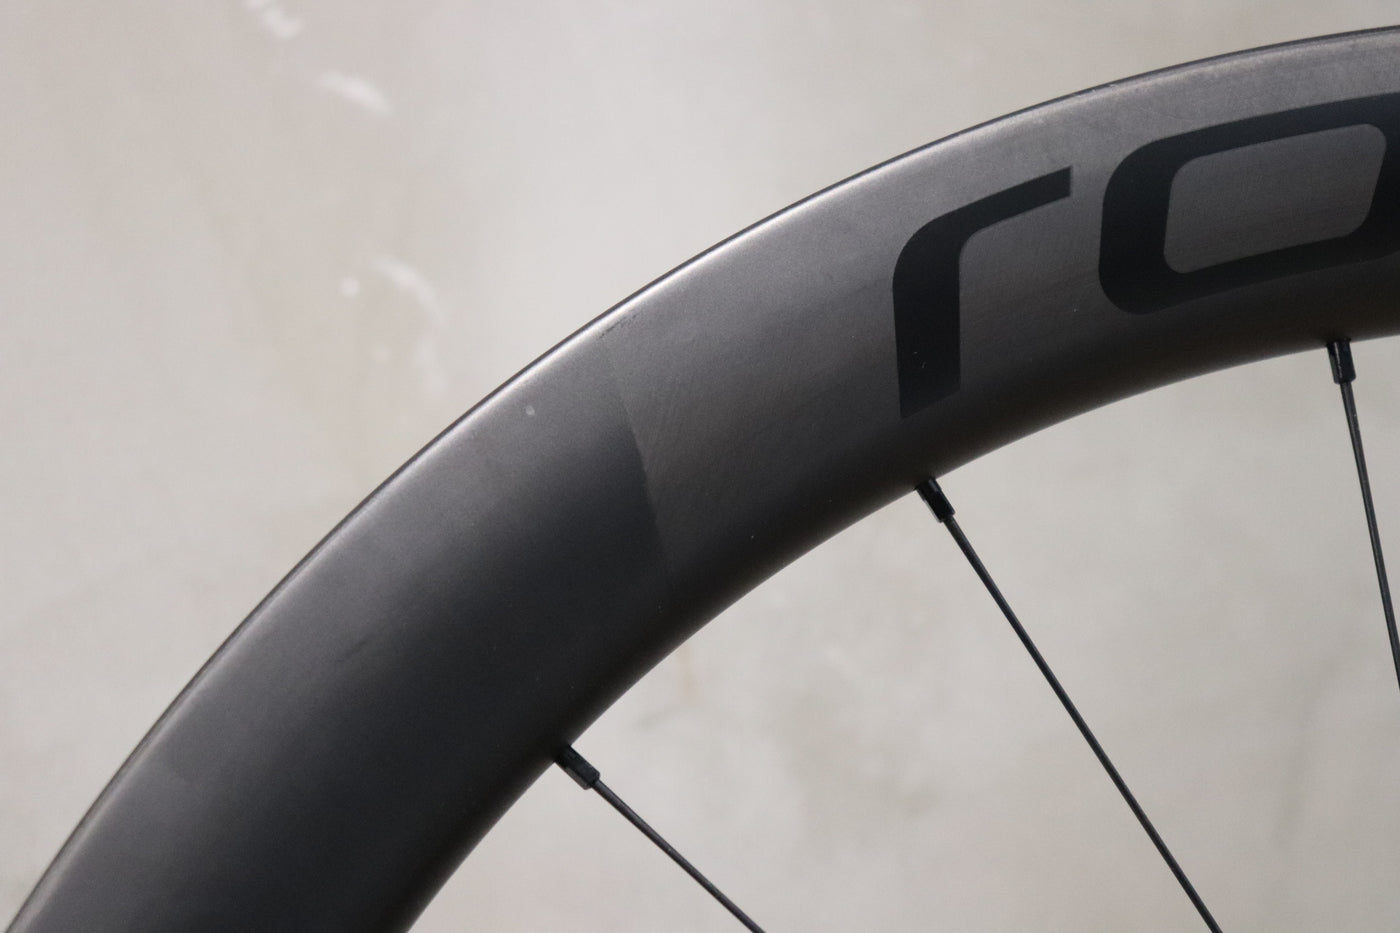 ROVAL Rapide CL DISC SRAM XDR